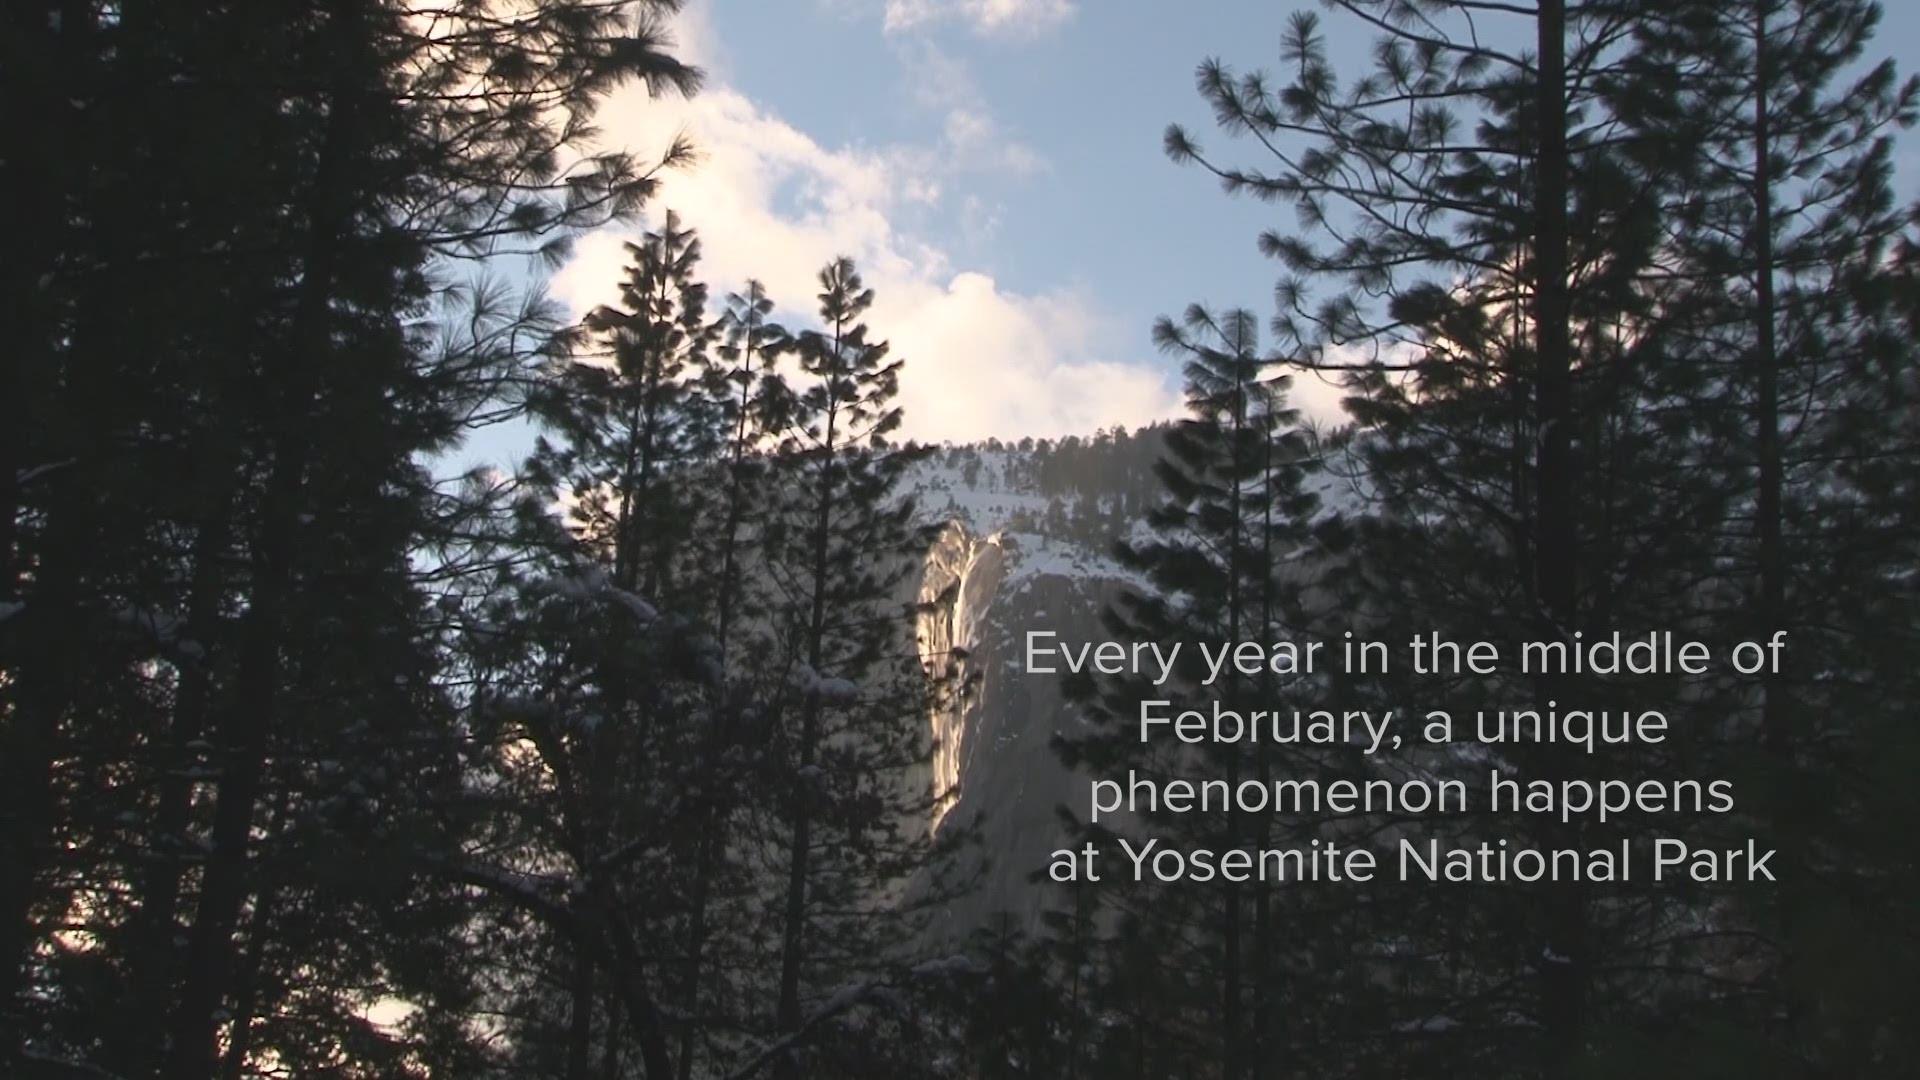 People from all over flock to see the "Firefall" at Yosemite National Park. The phenomenon is only visible for about two weeks, one time each year.